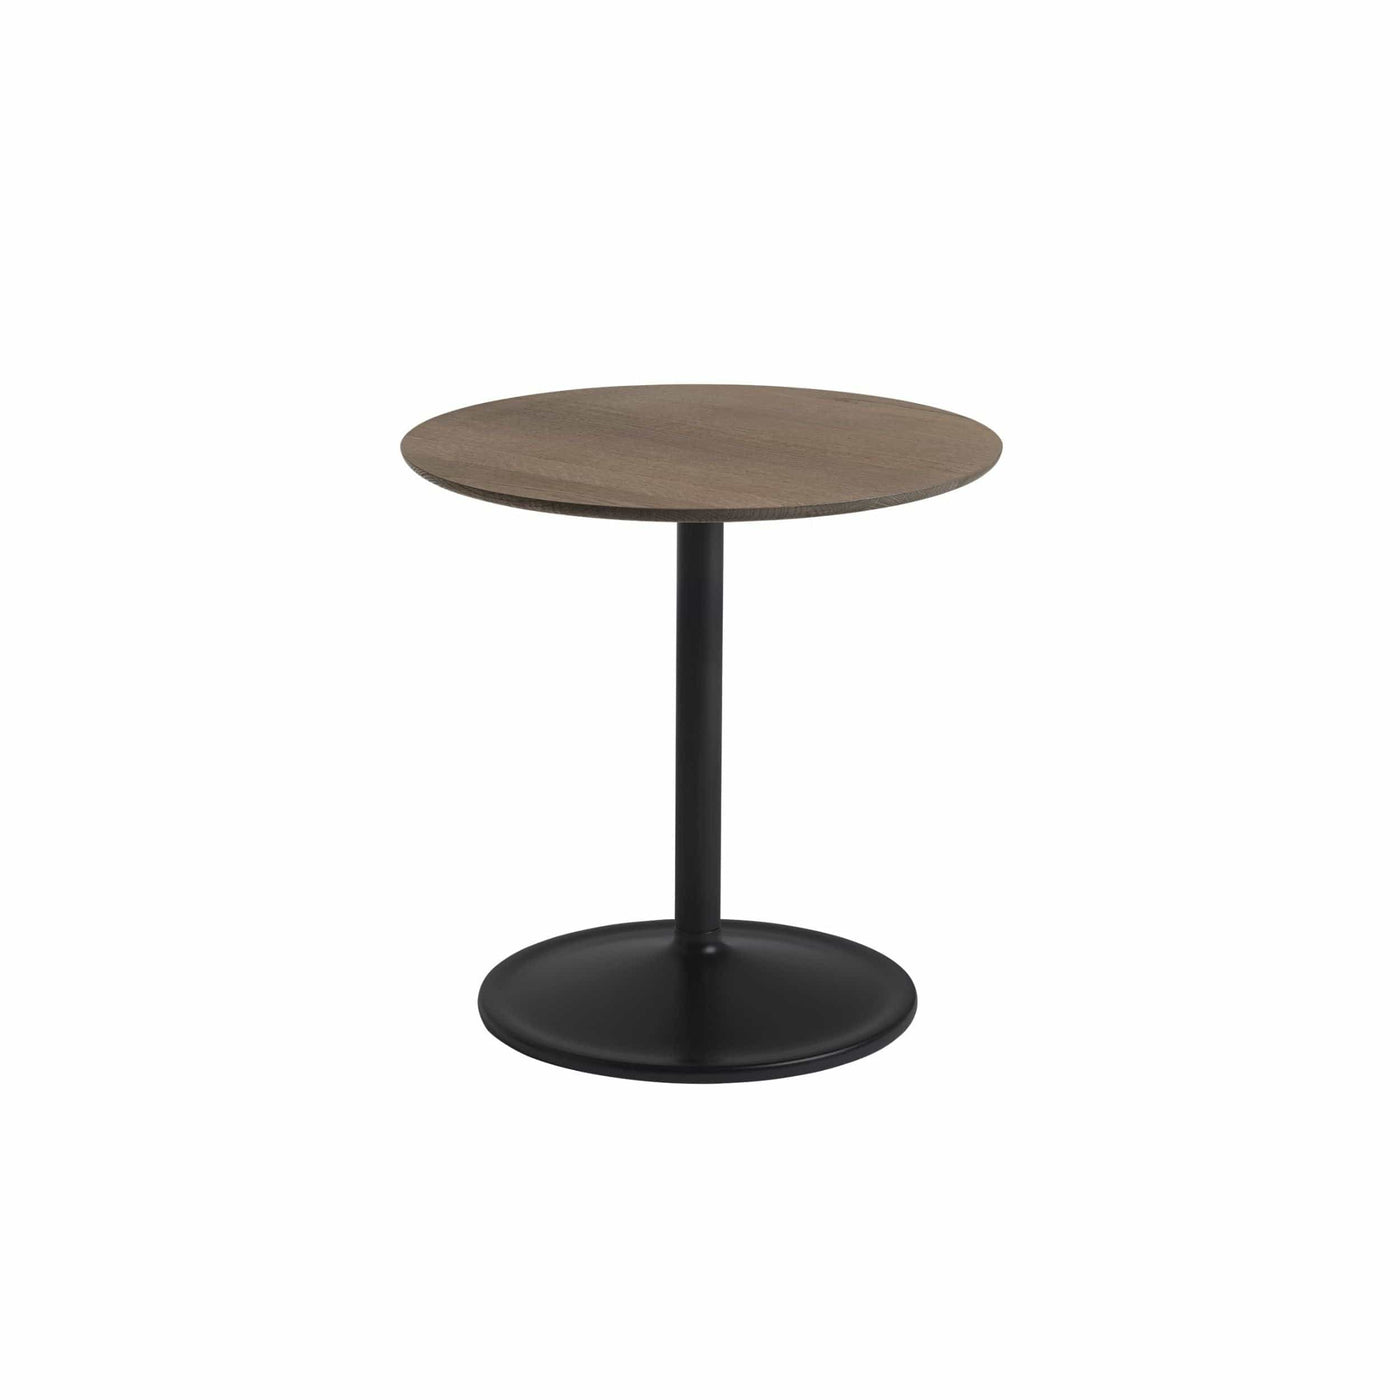 Muuto Soft side table Ø48 x 48cm high. Shop online at someday designs. #colour_solid-smoked-oak-black